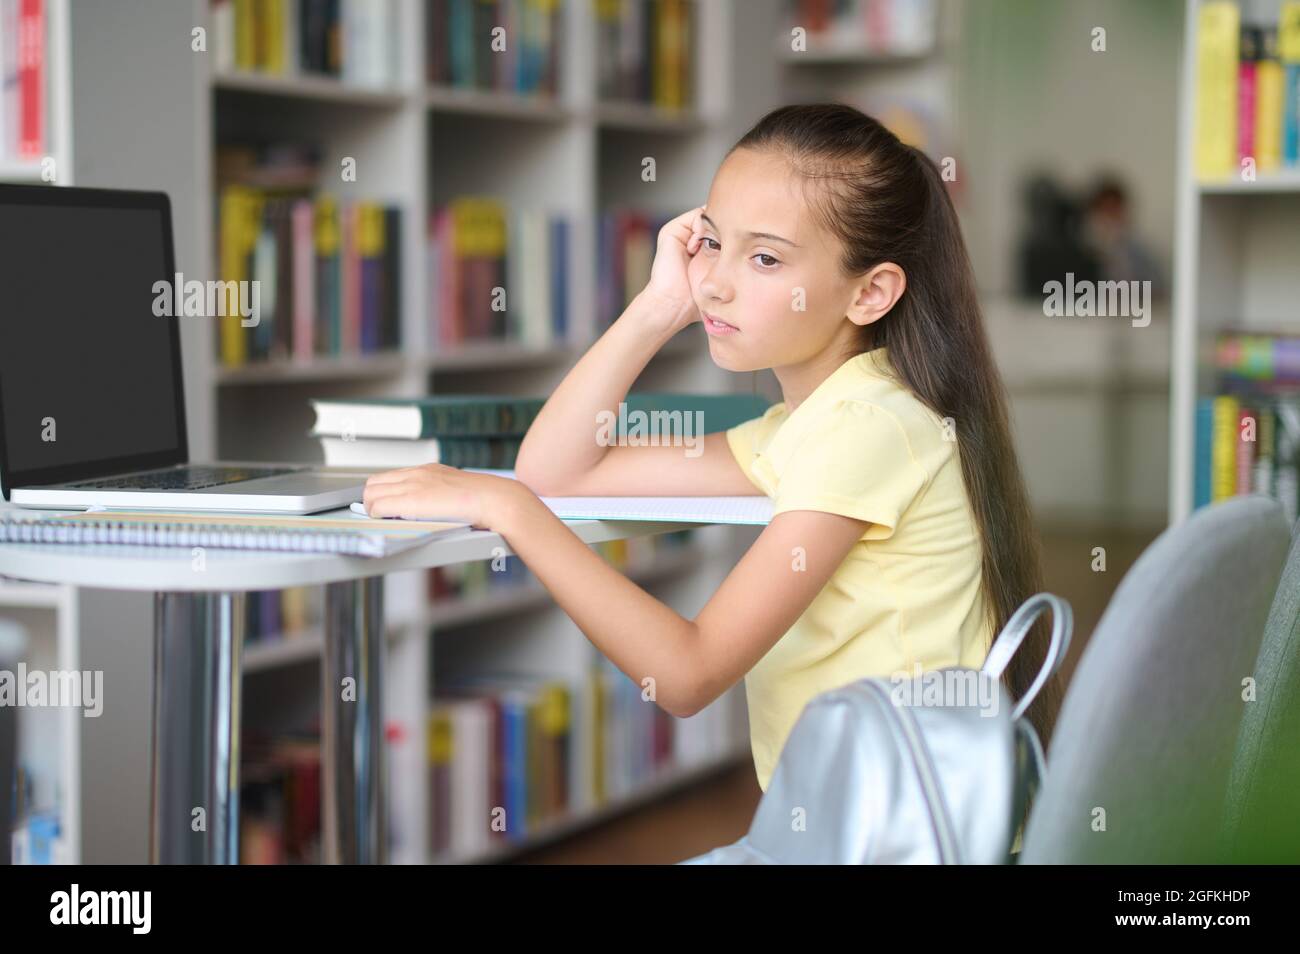 Pupil with a faraway look on her face at the desk Stock Photo